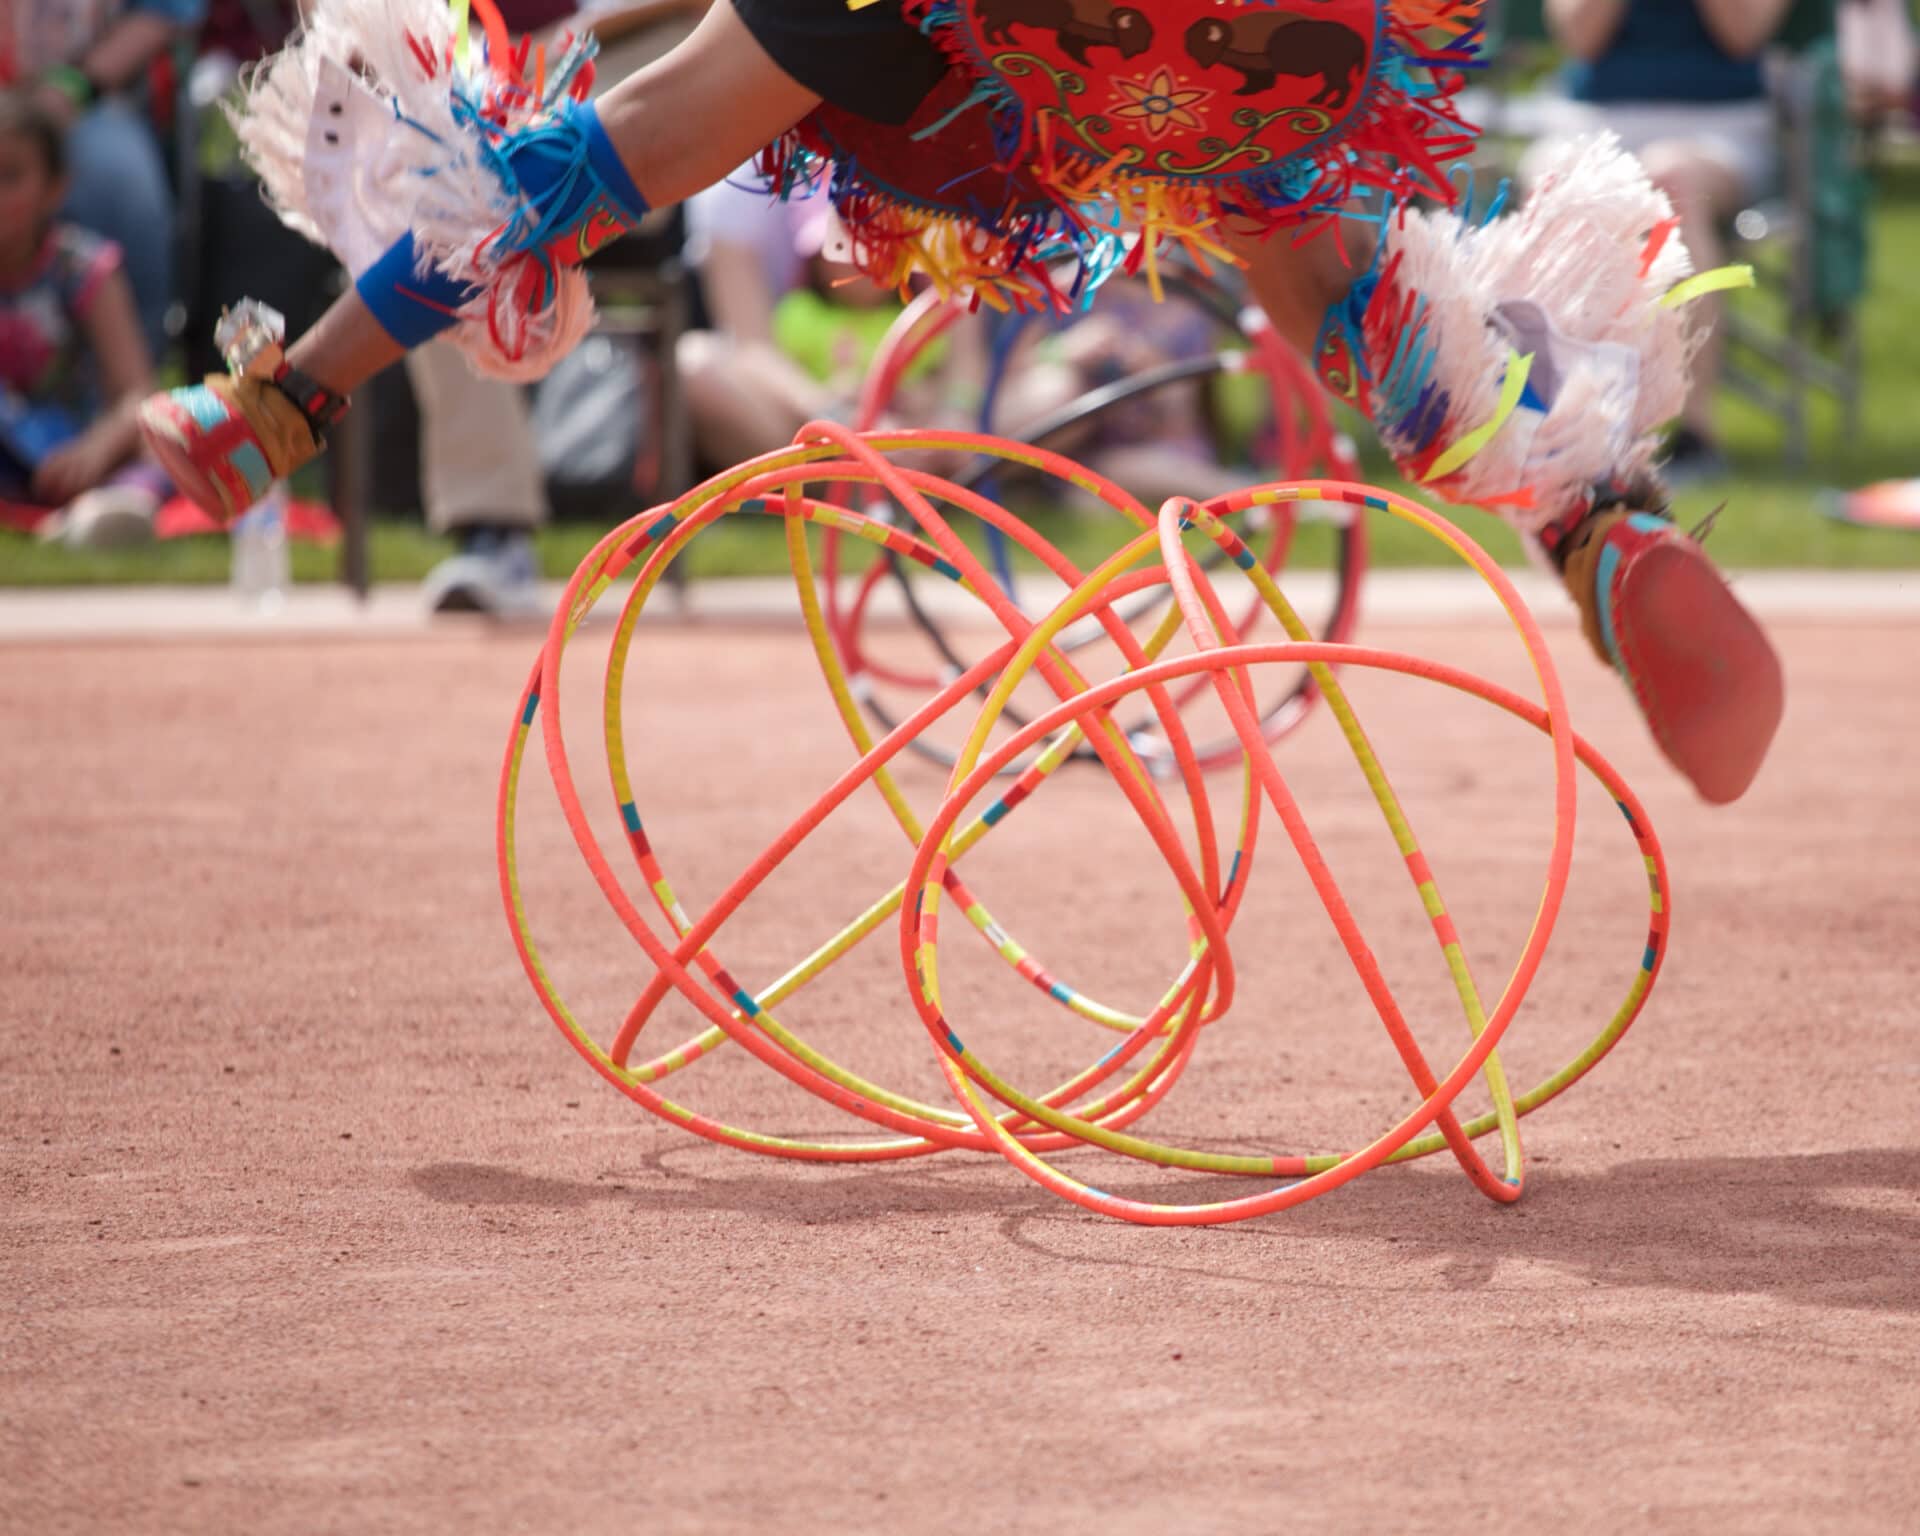 a person in native regalia jumps over a tangle of orange and yellow hoops